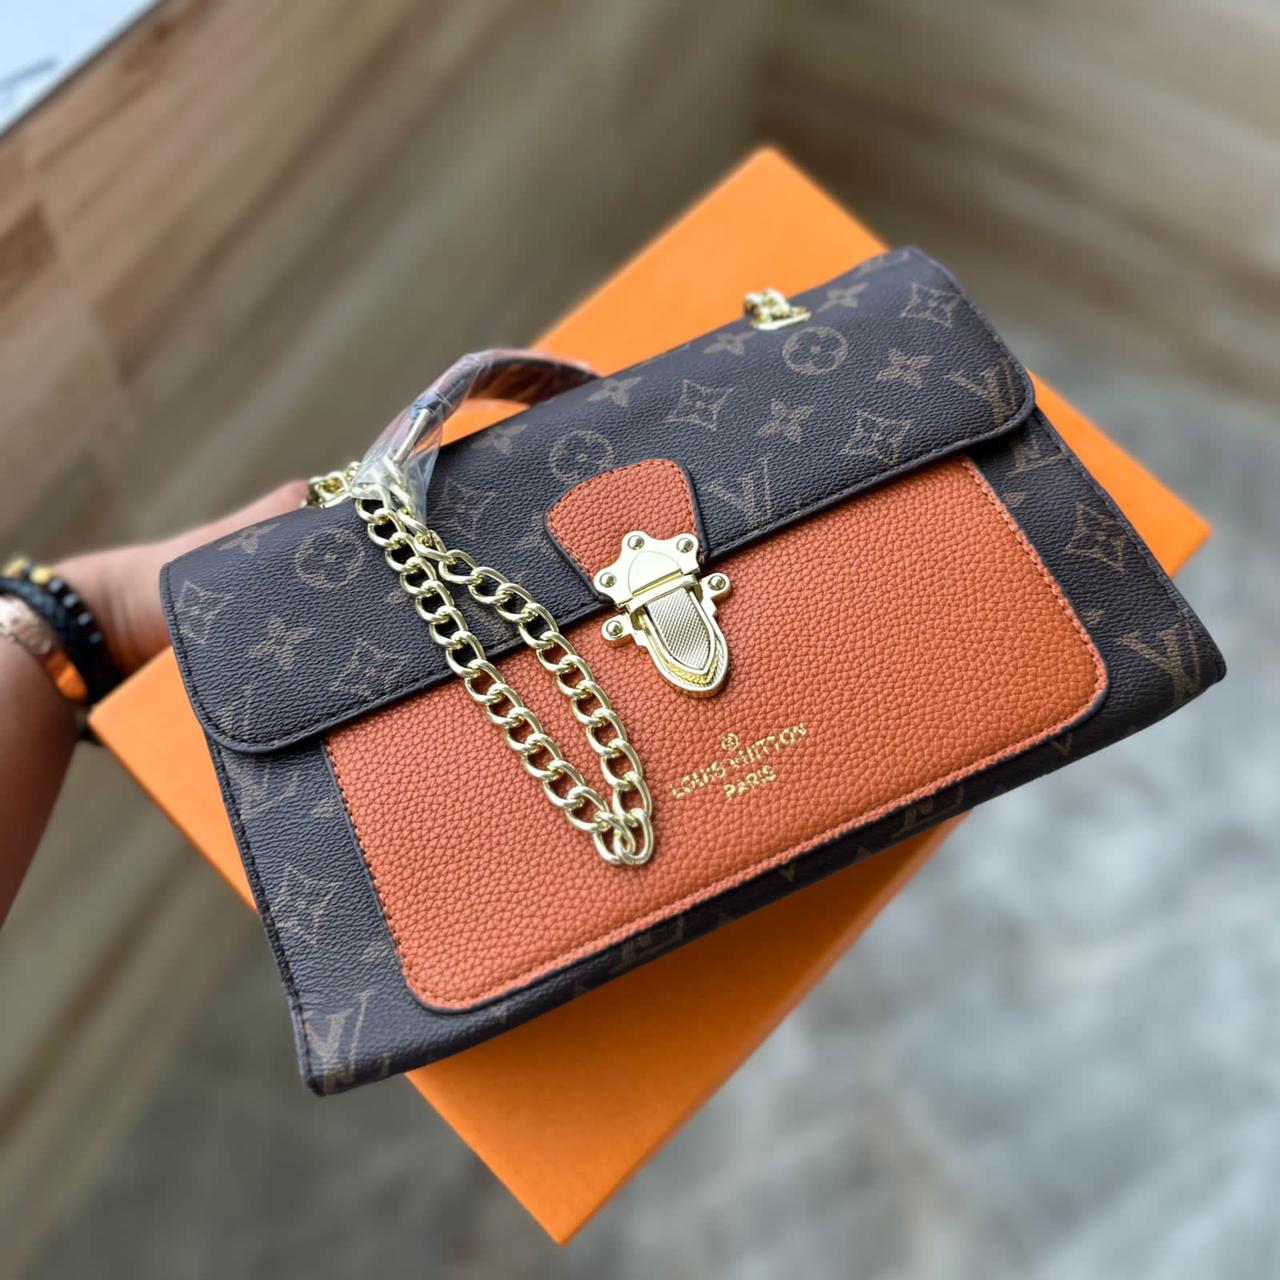 Where can I buy the best replica Louis Vuitton bags online? - Quora